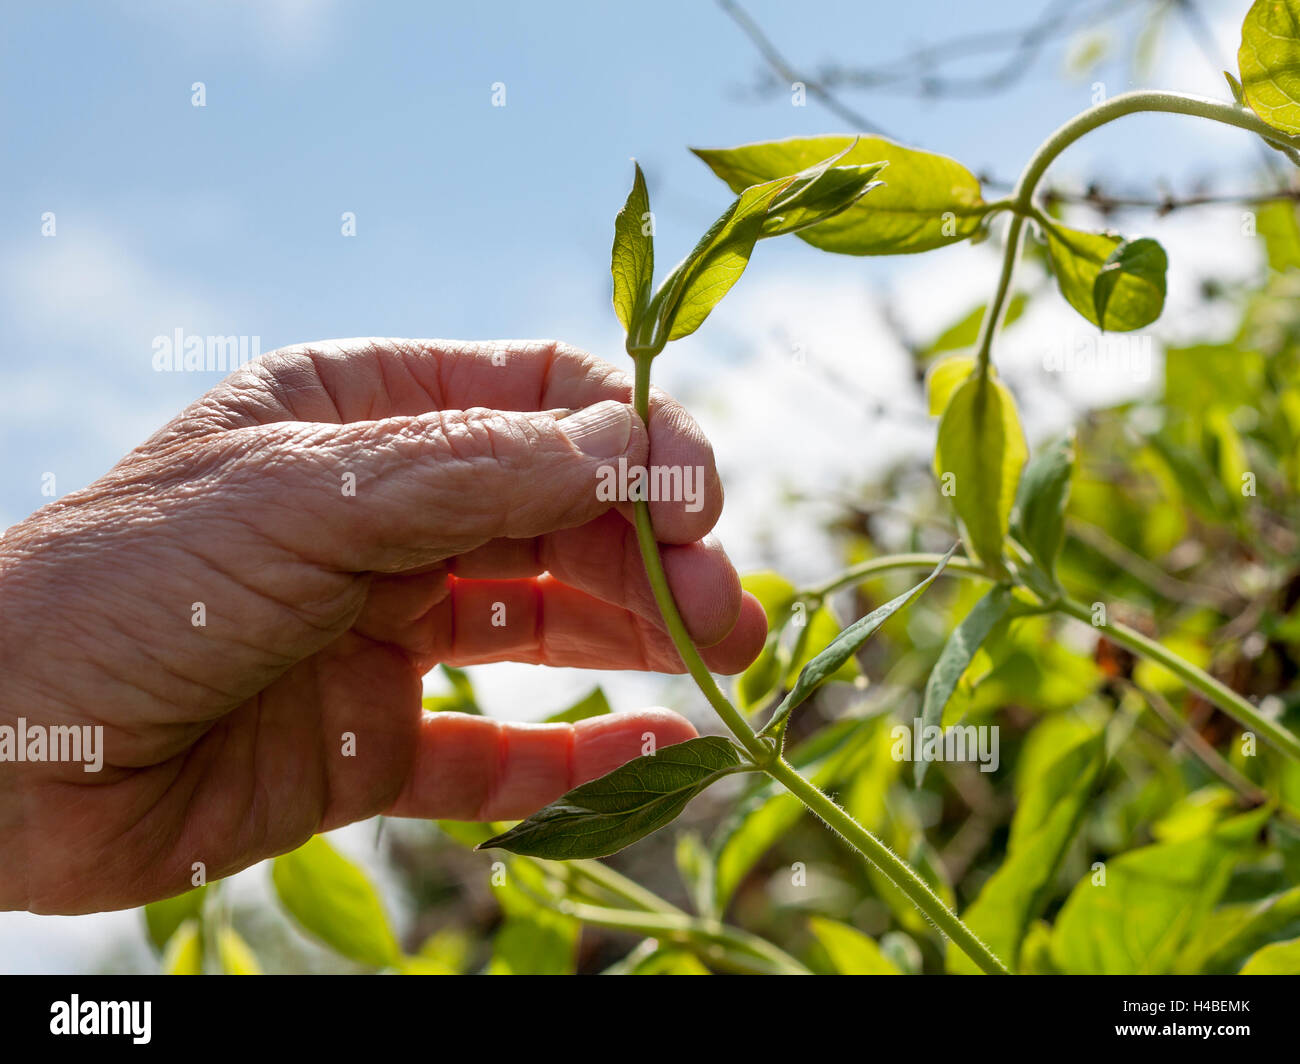 Gardener's hand holding a young creeping plant with blue background. Senior woman Stock Photo